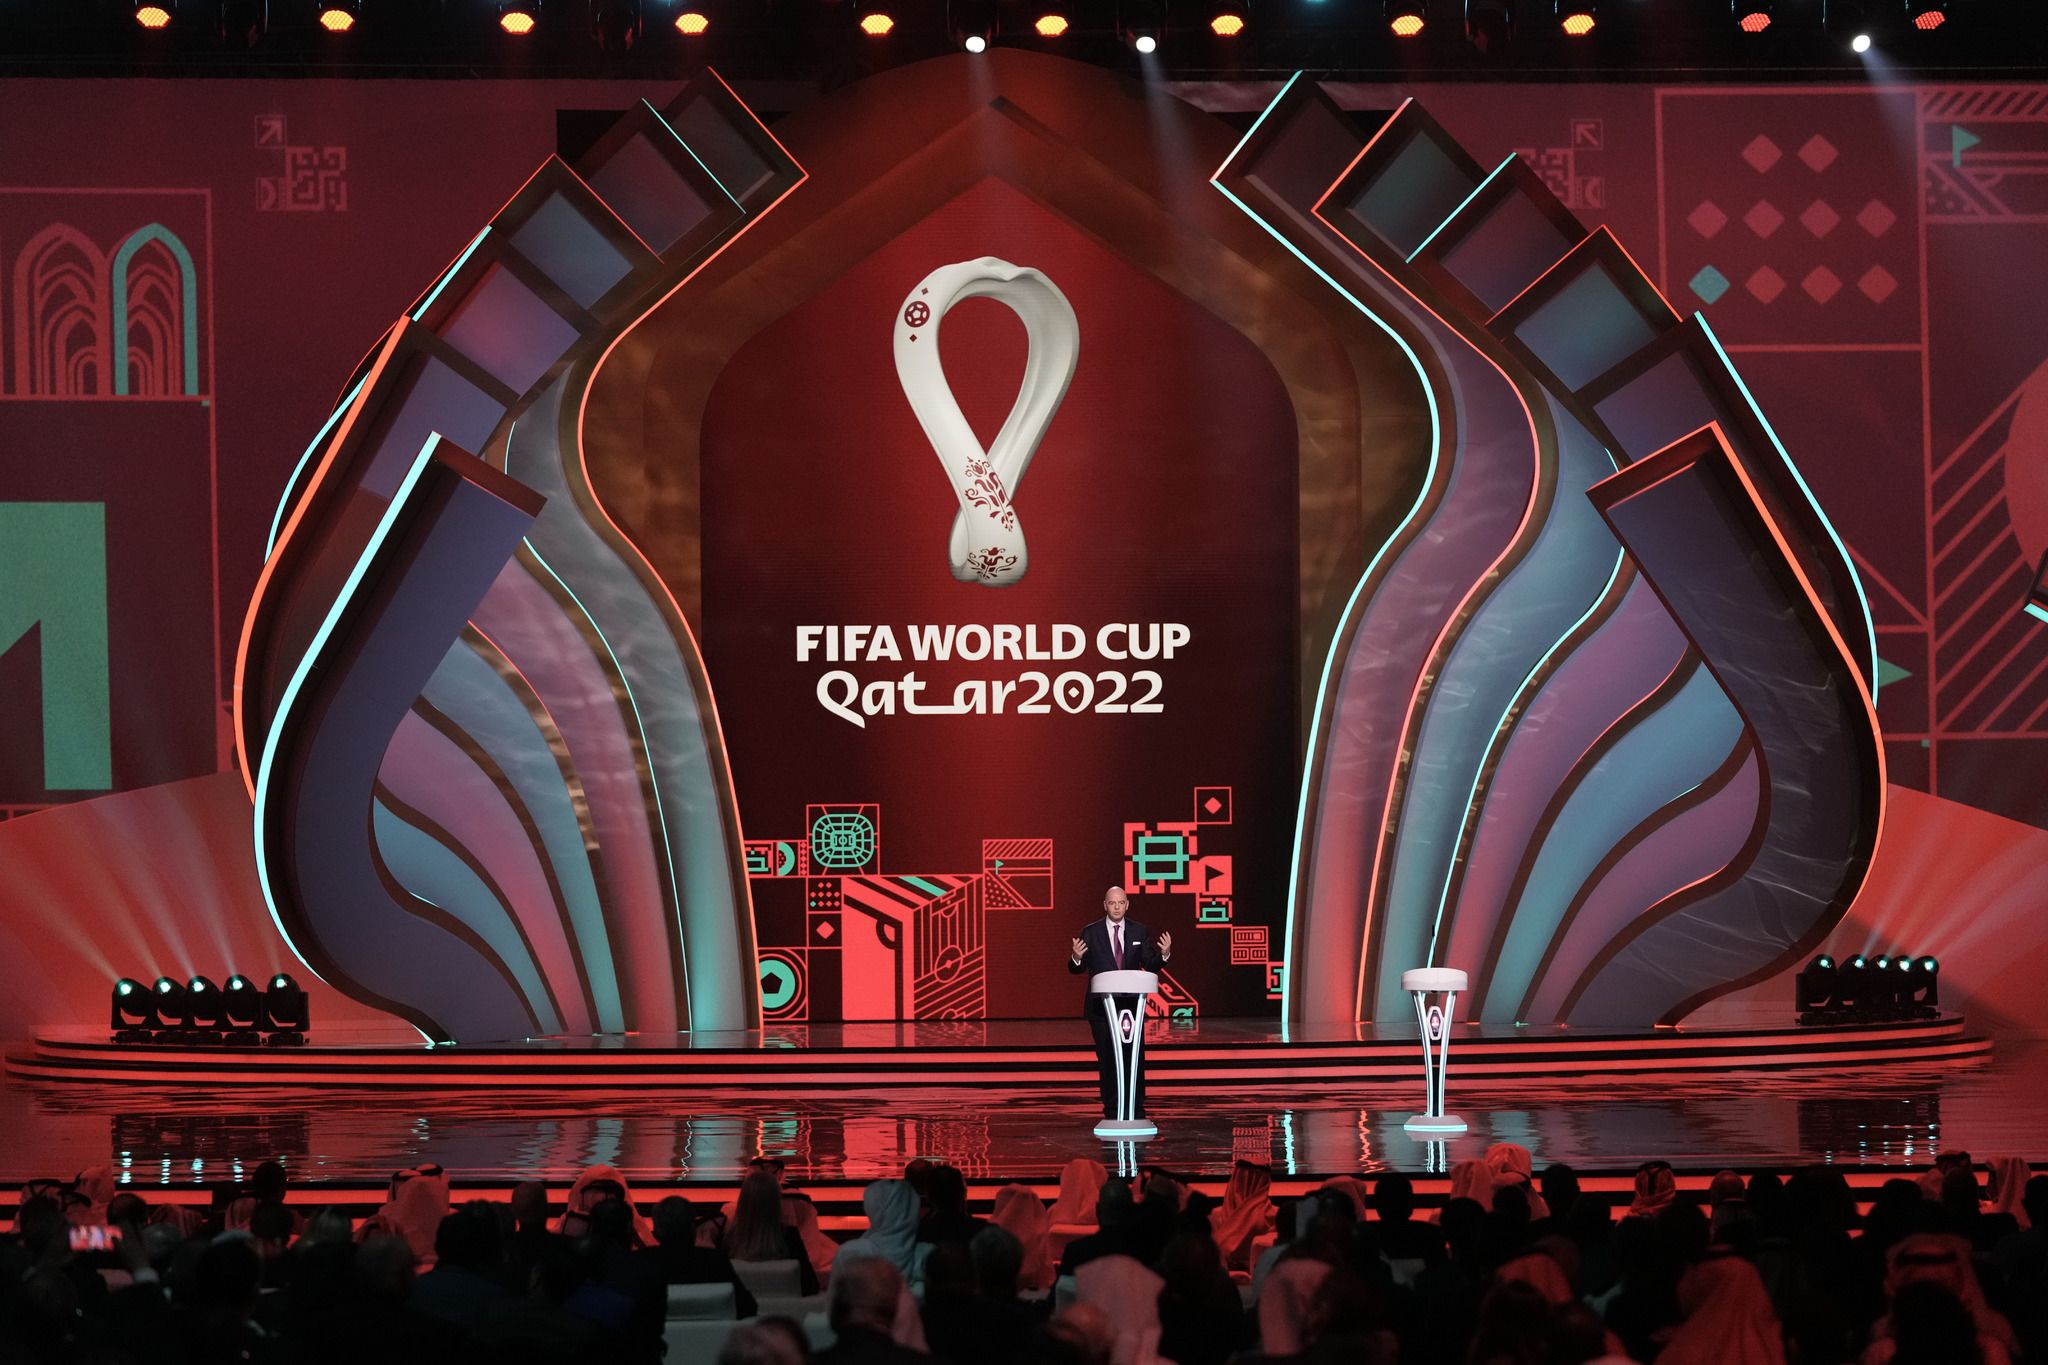 FIFA earns $1 billion more from the 2022 World Cup in Qatar than from the World Cup in Russia